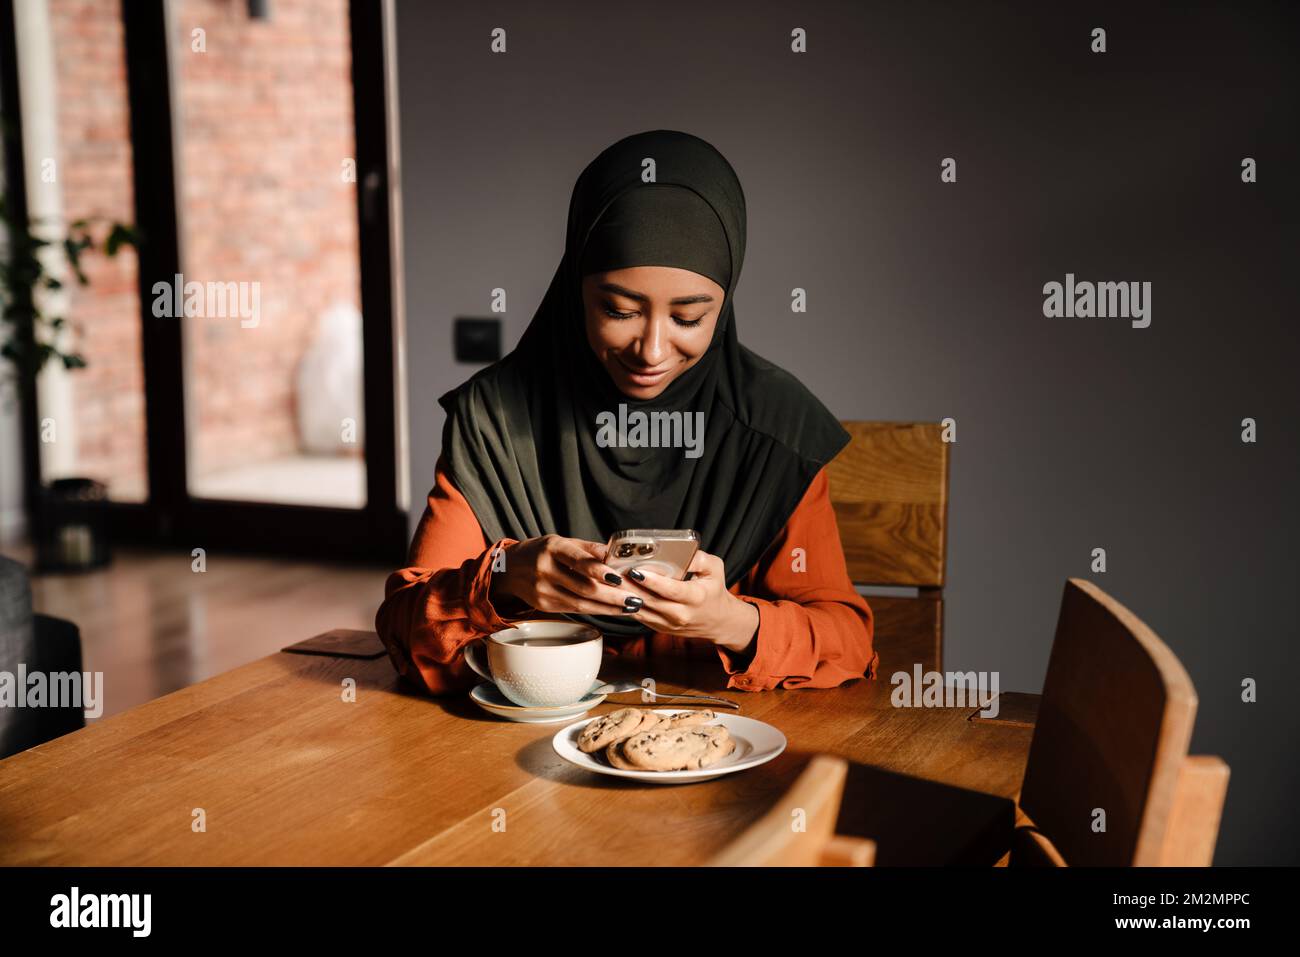 Young beautiful smiling woman in hijab with phone sitting at kitchen table with cup of tea and cookies Stock Photo